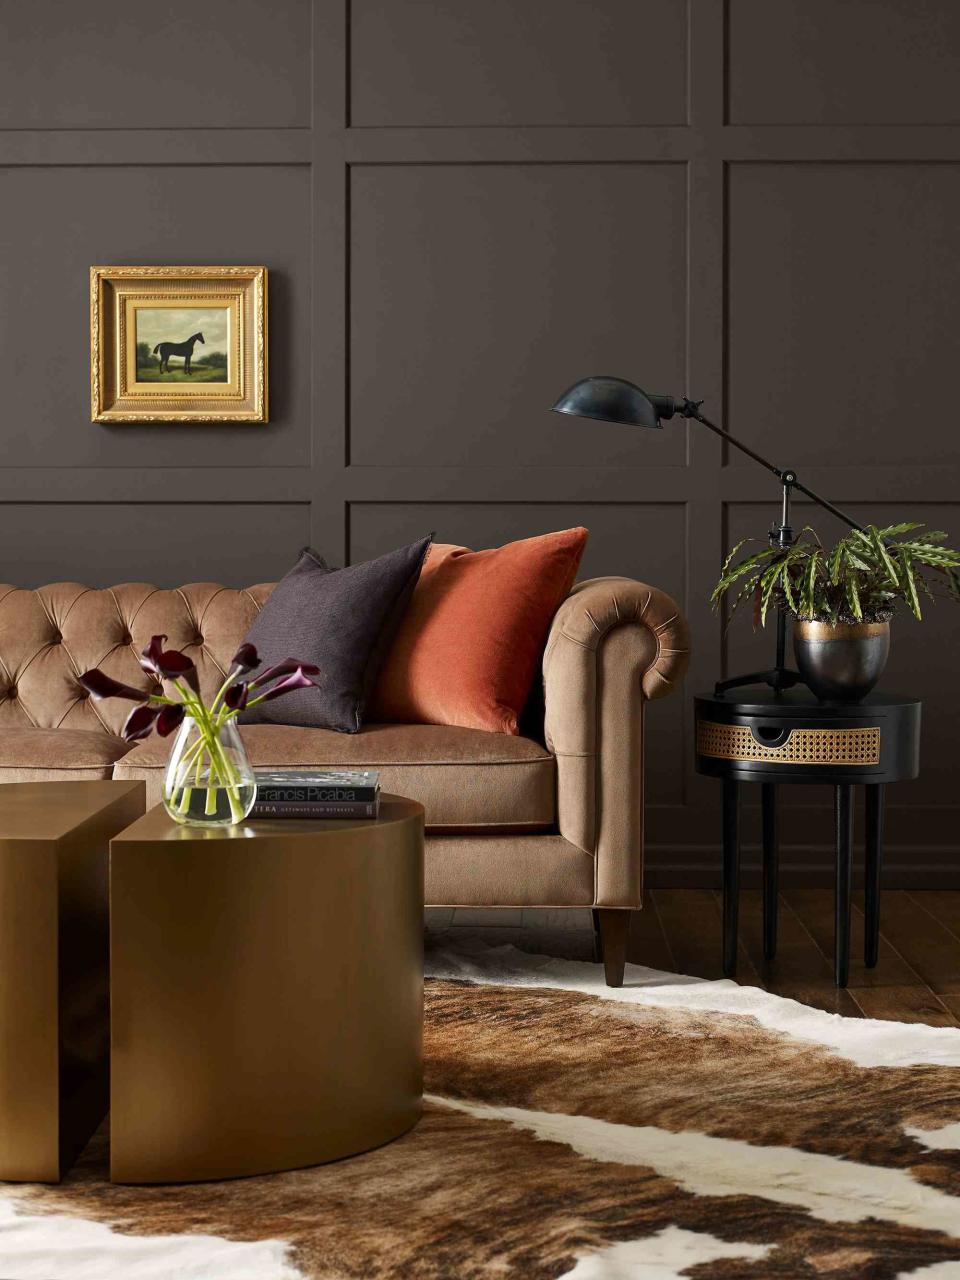 The 10 Best Brown Paint Colors for Khaki, Taupe, and More